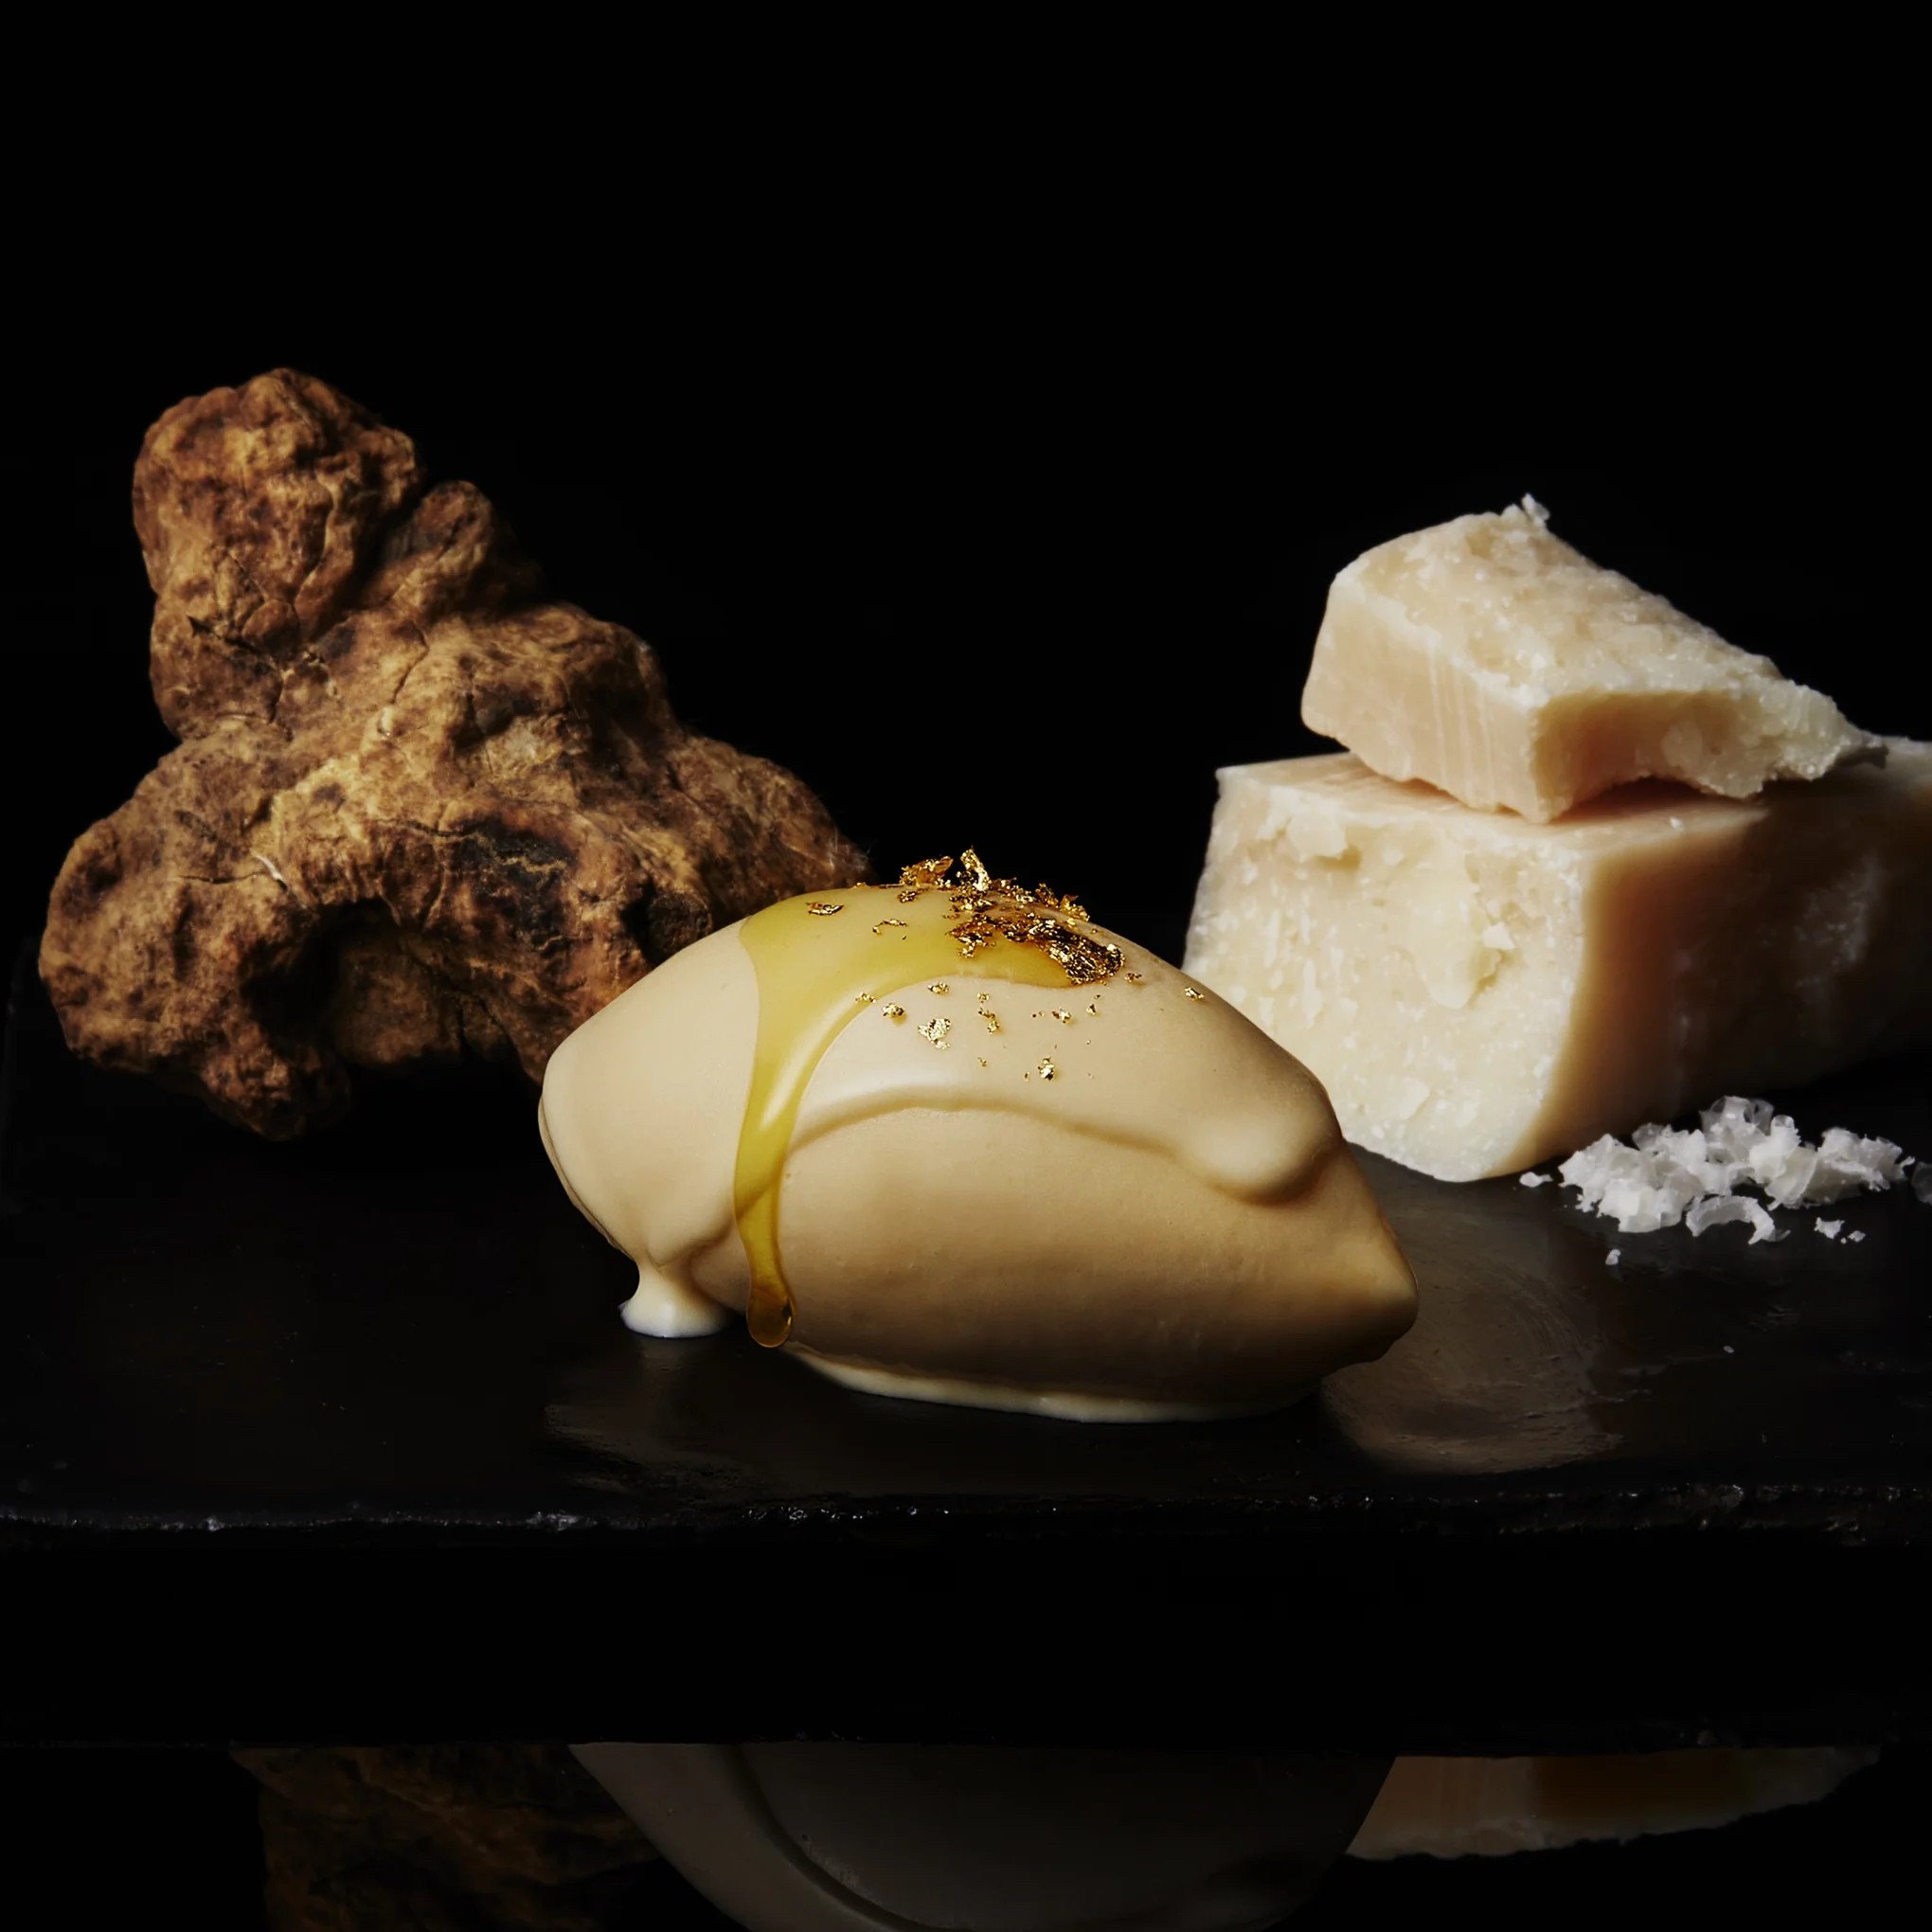 Made by Japanese brand Cellato, the world’s most expensive ice cream includes white truffle, edible gold and cheese, and has set a Guinness World Record. Photo: Cellato